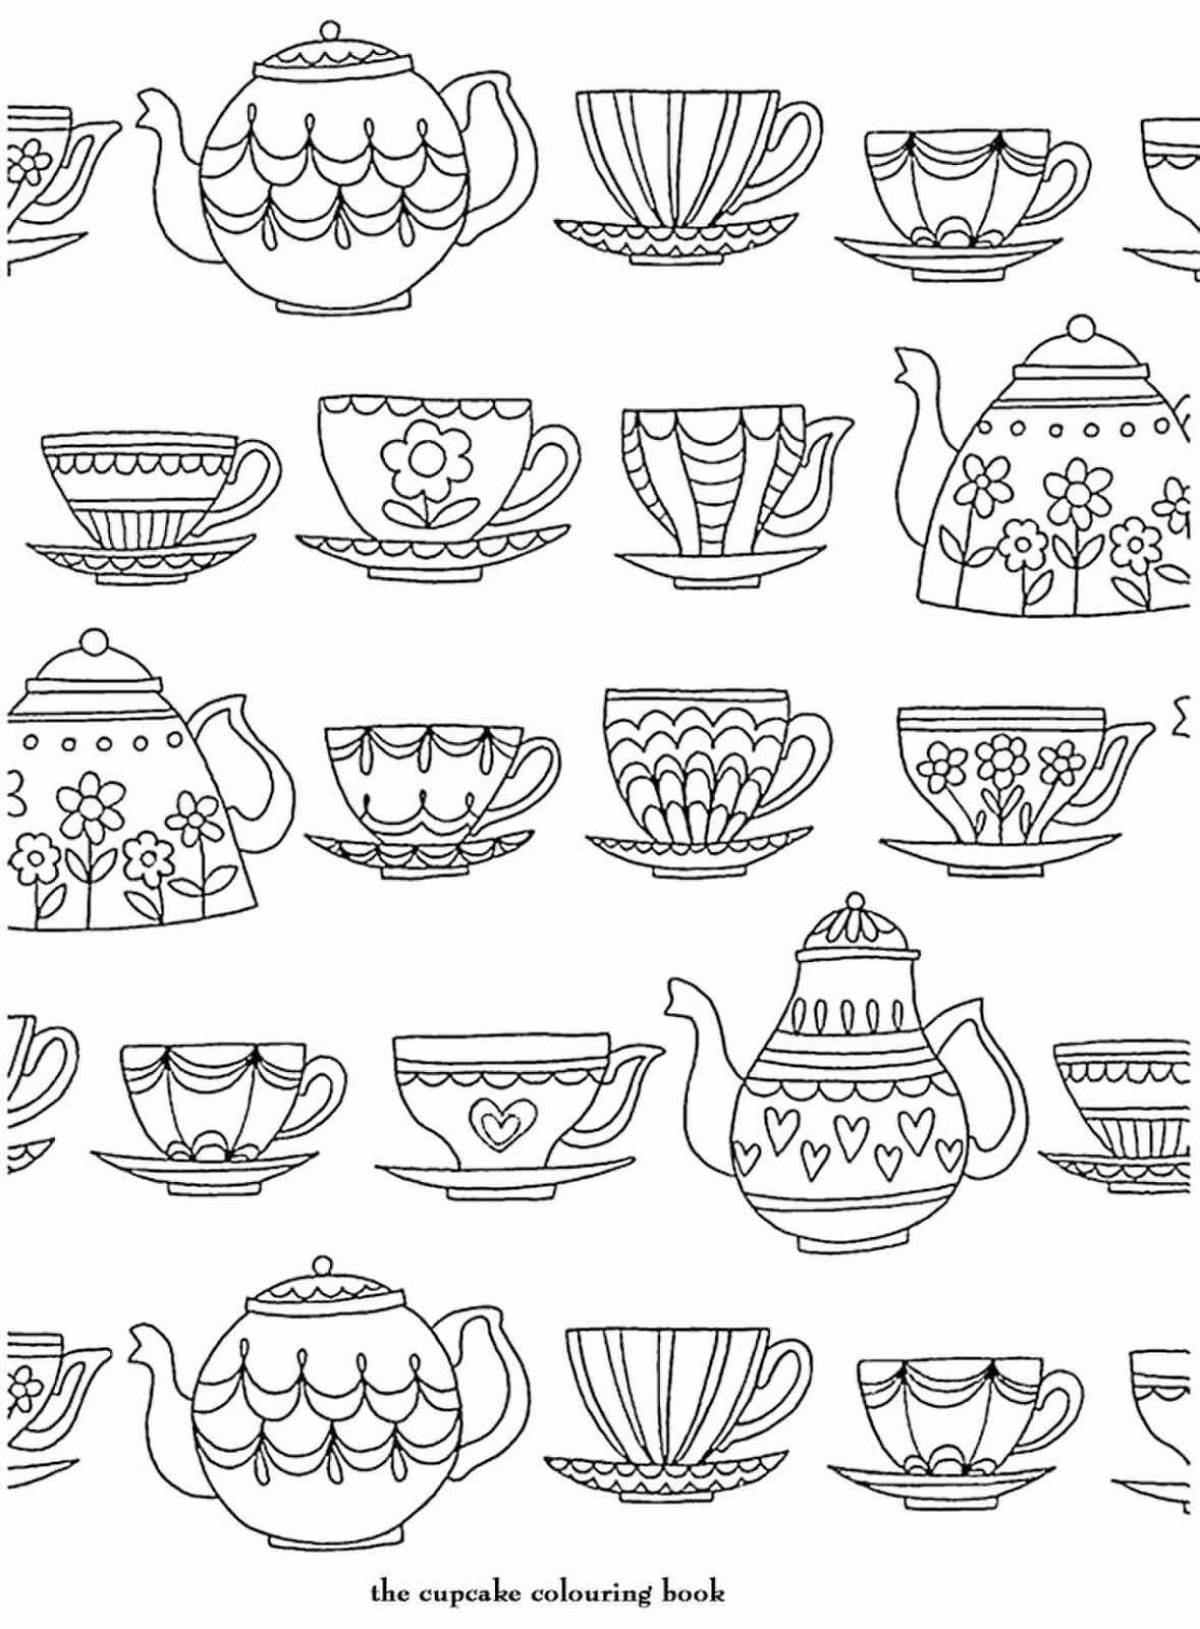 Creative service coloring page